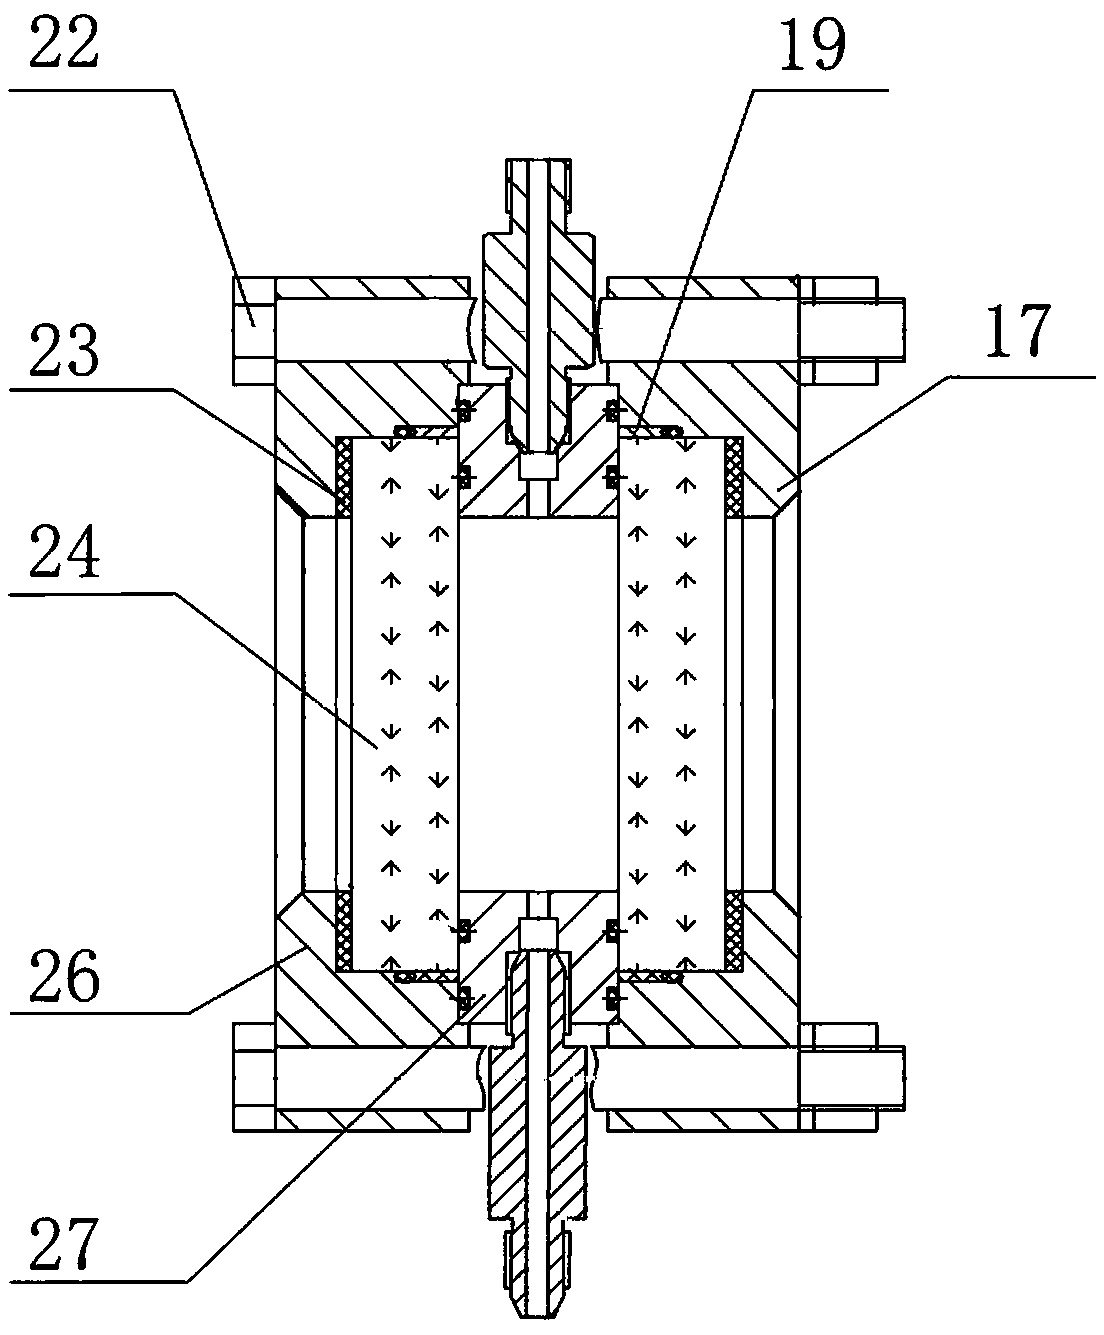 Visible reactor and visual experiment system and method for replacing natural gas hydrate